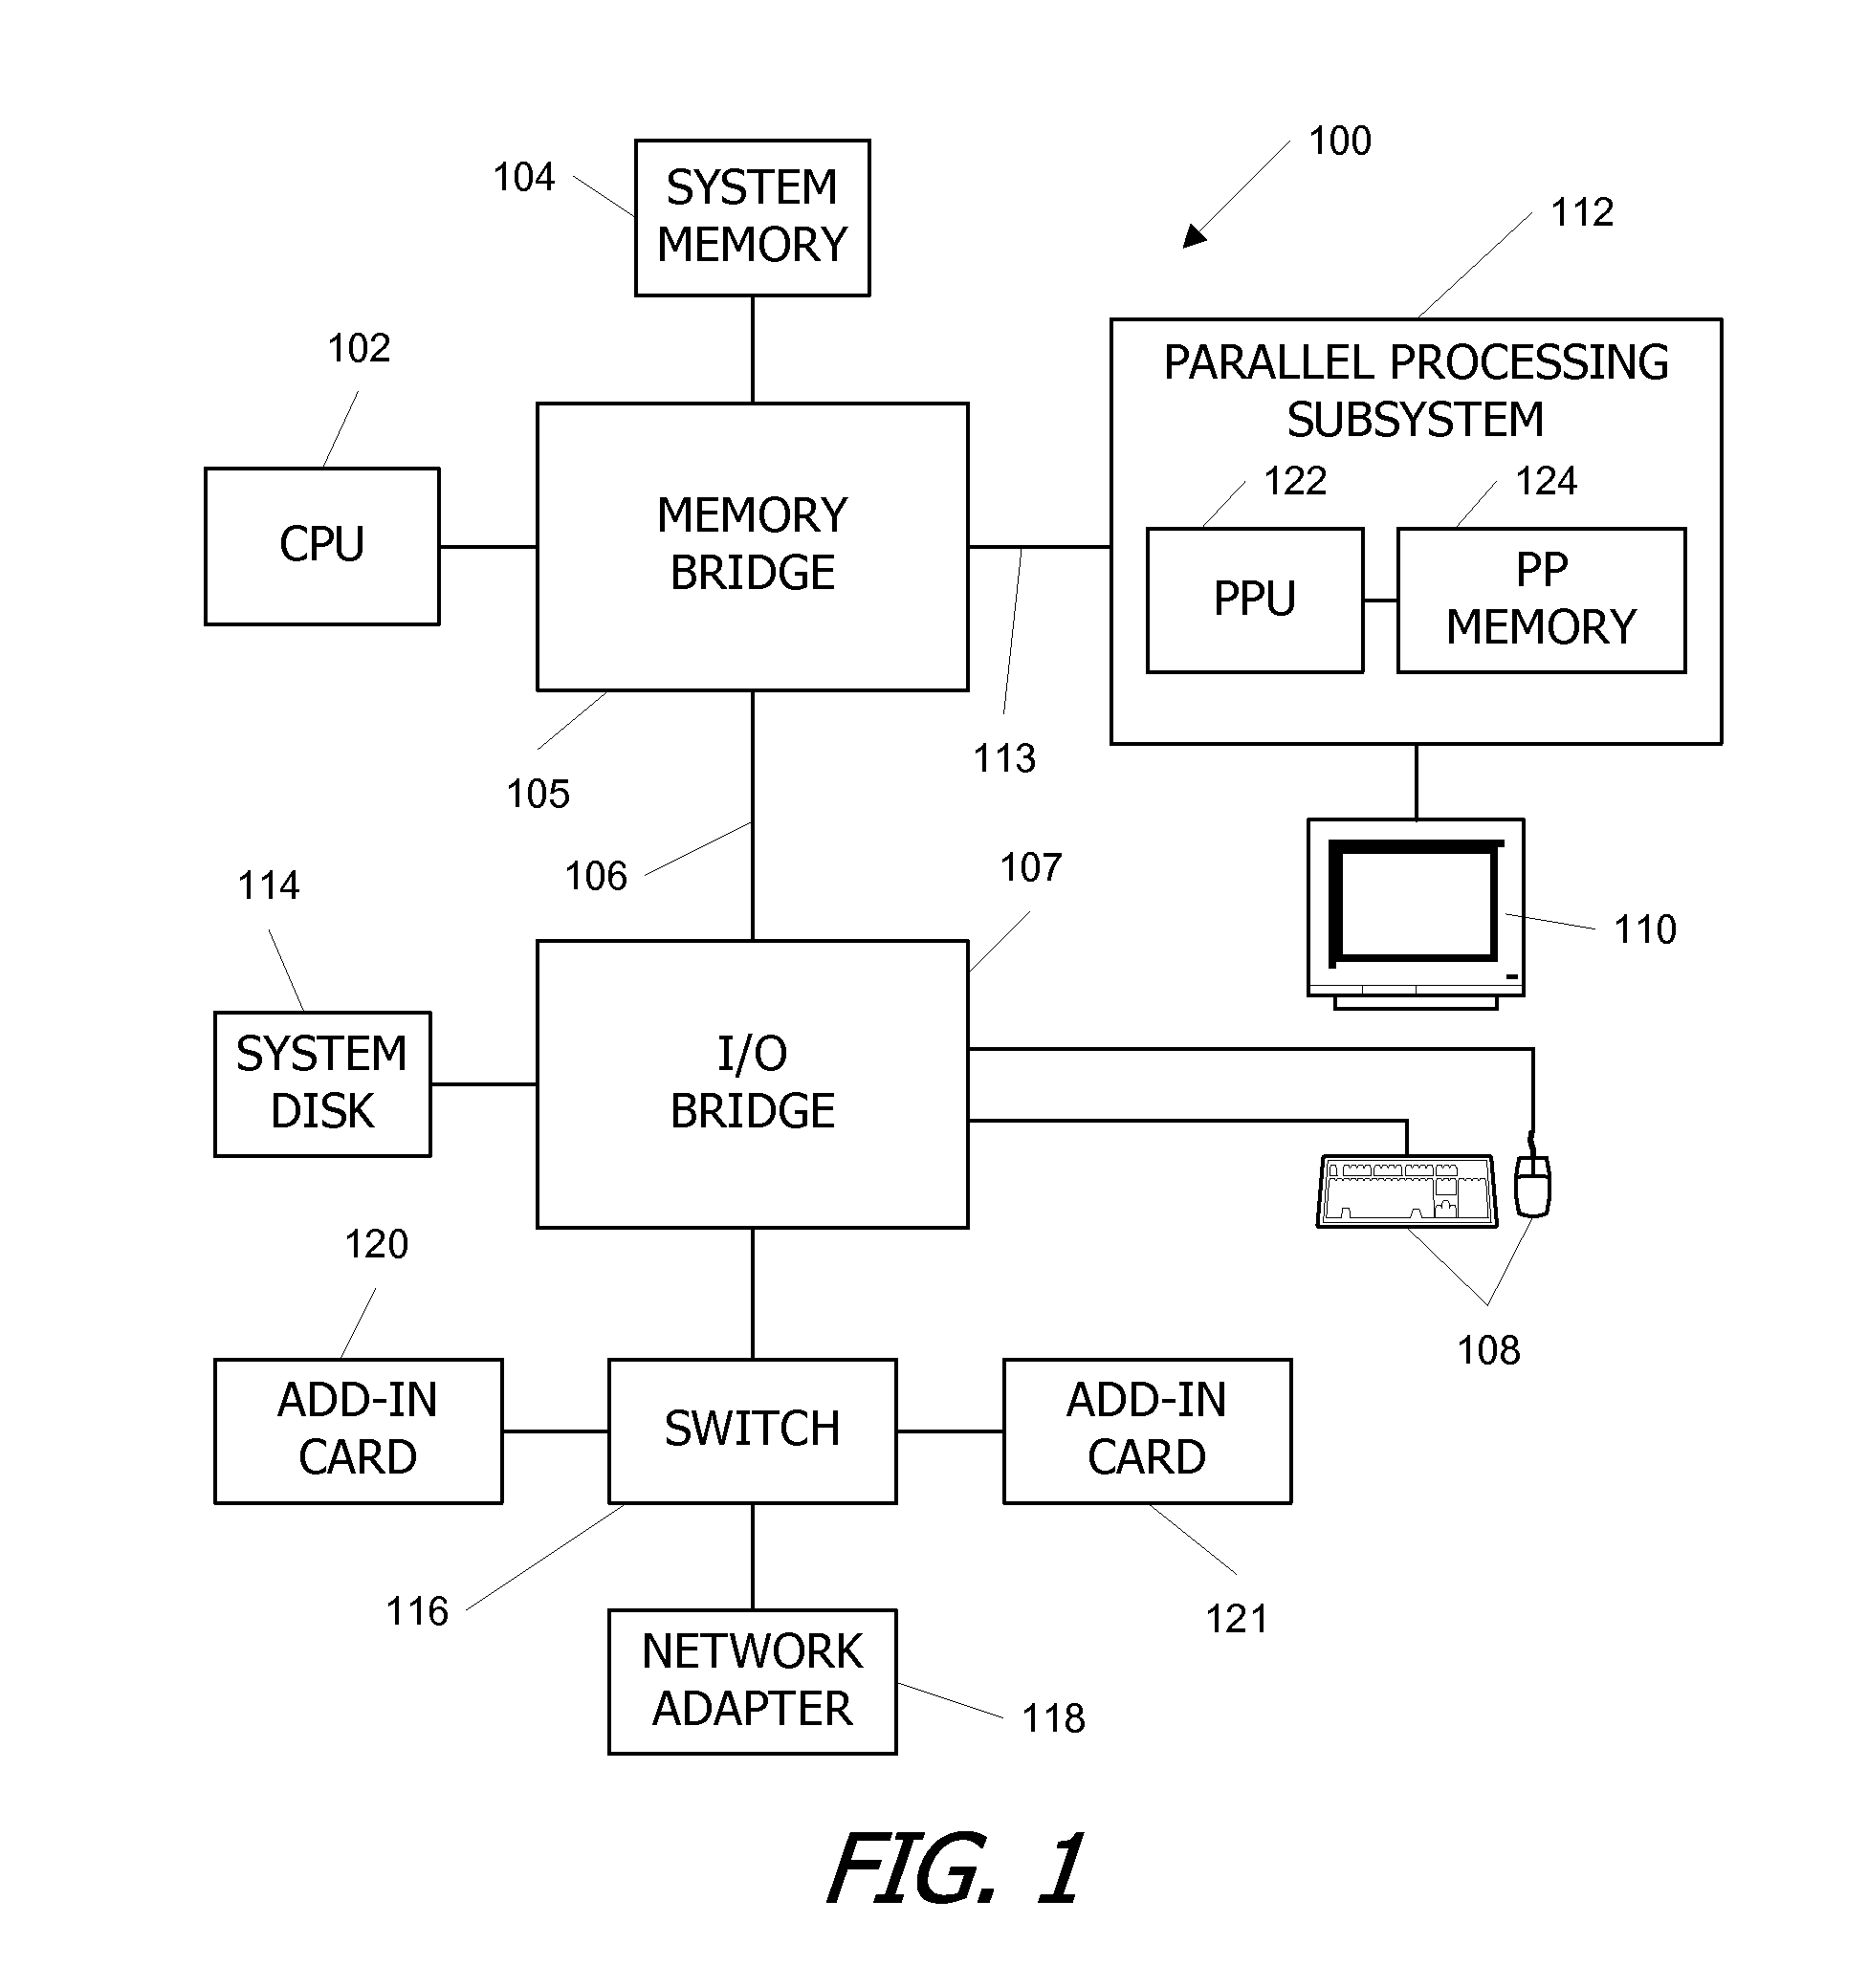 Controlling access to memory resources shared among parallel synchronizable threads